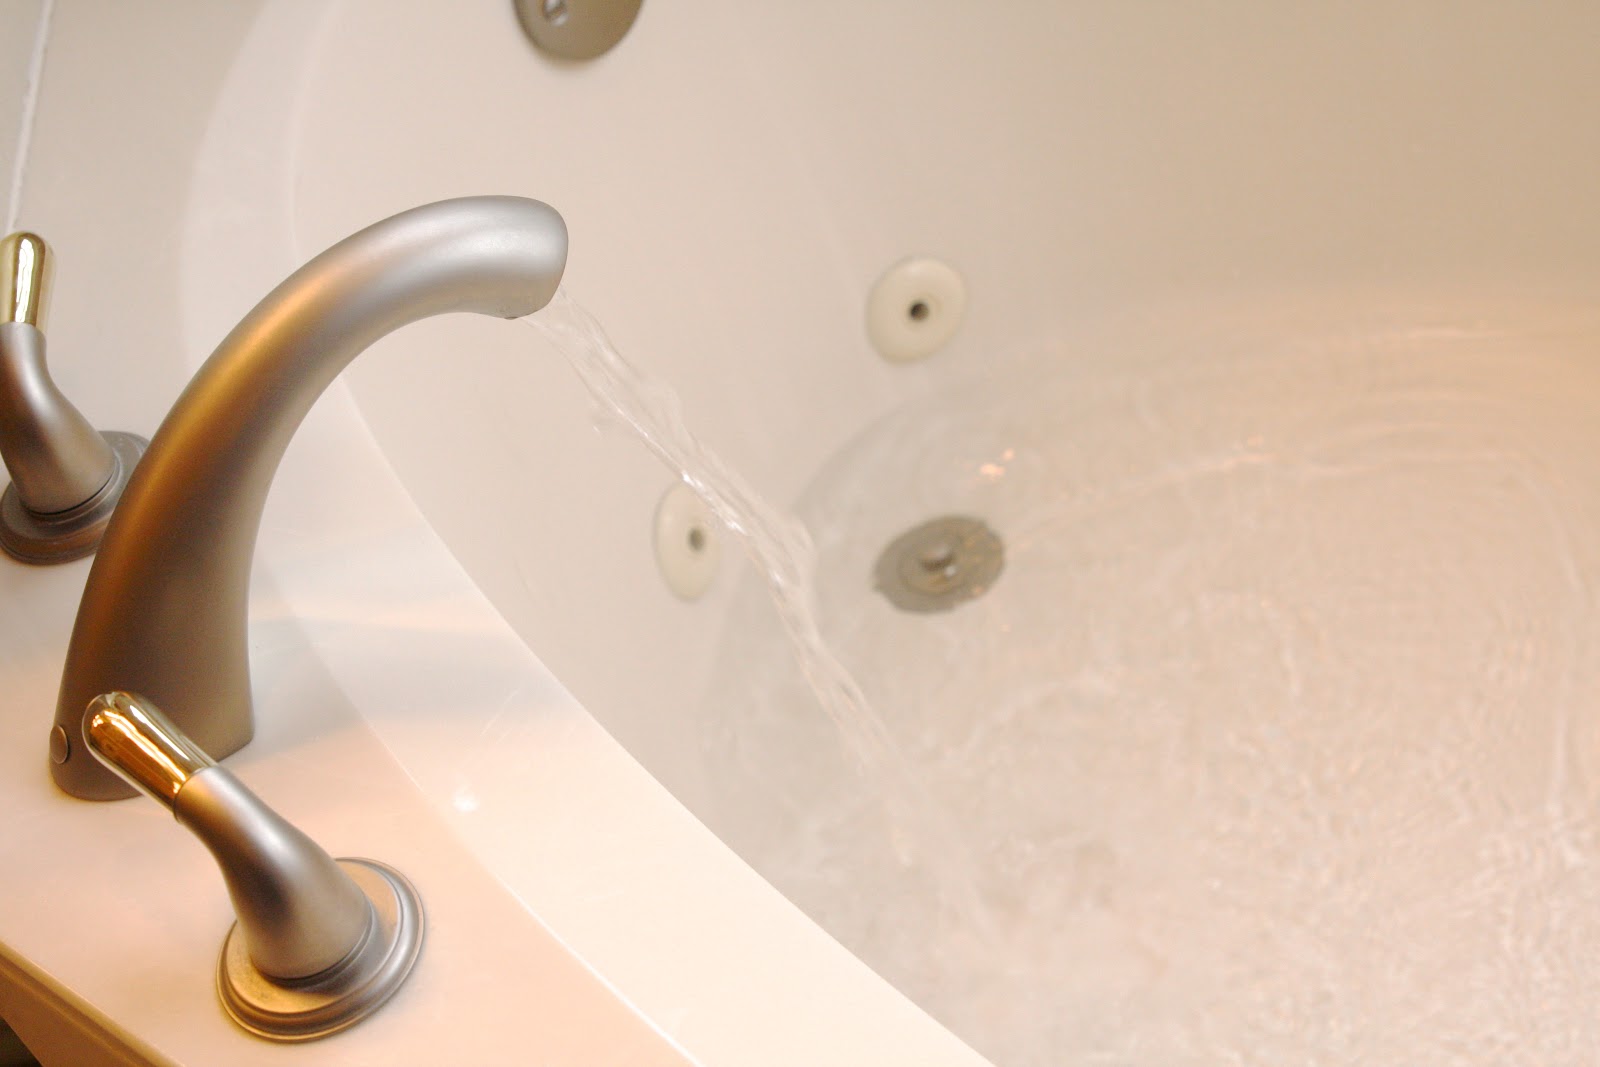 How To Clean Whirlpool Tub Jets Simply Organized